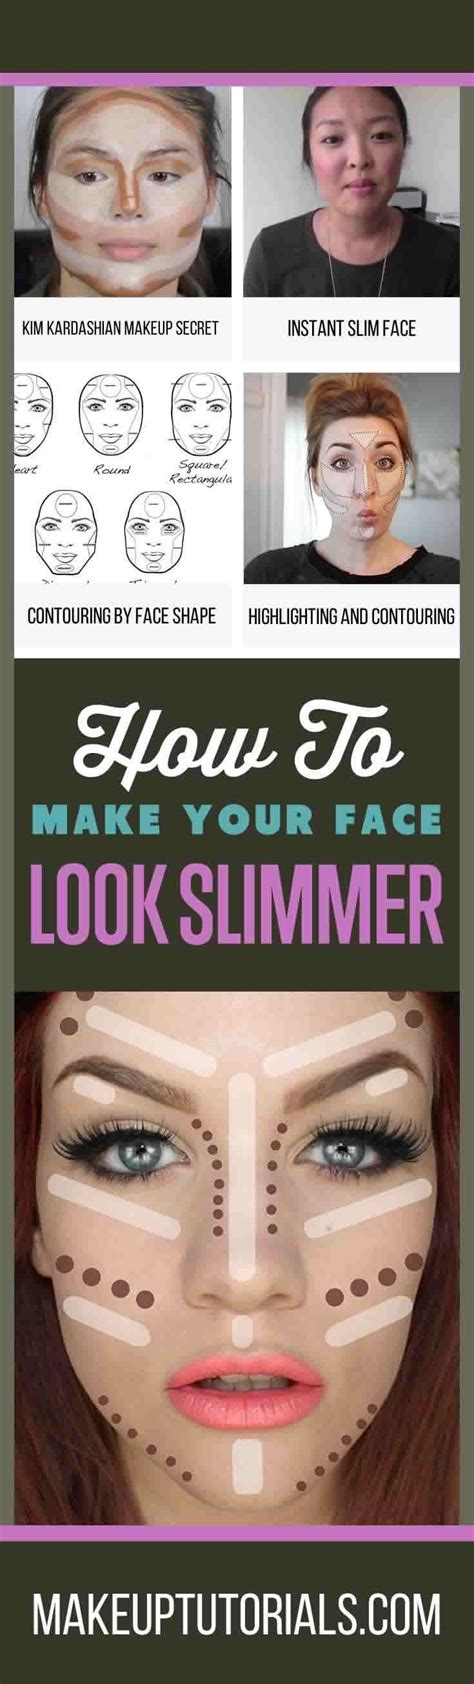 How To Make Your Face Thinner With Makeup Makeup Tutorials Contour